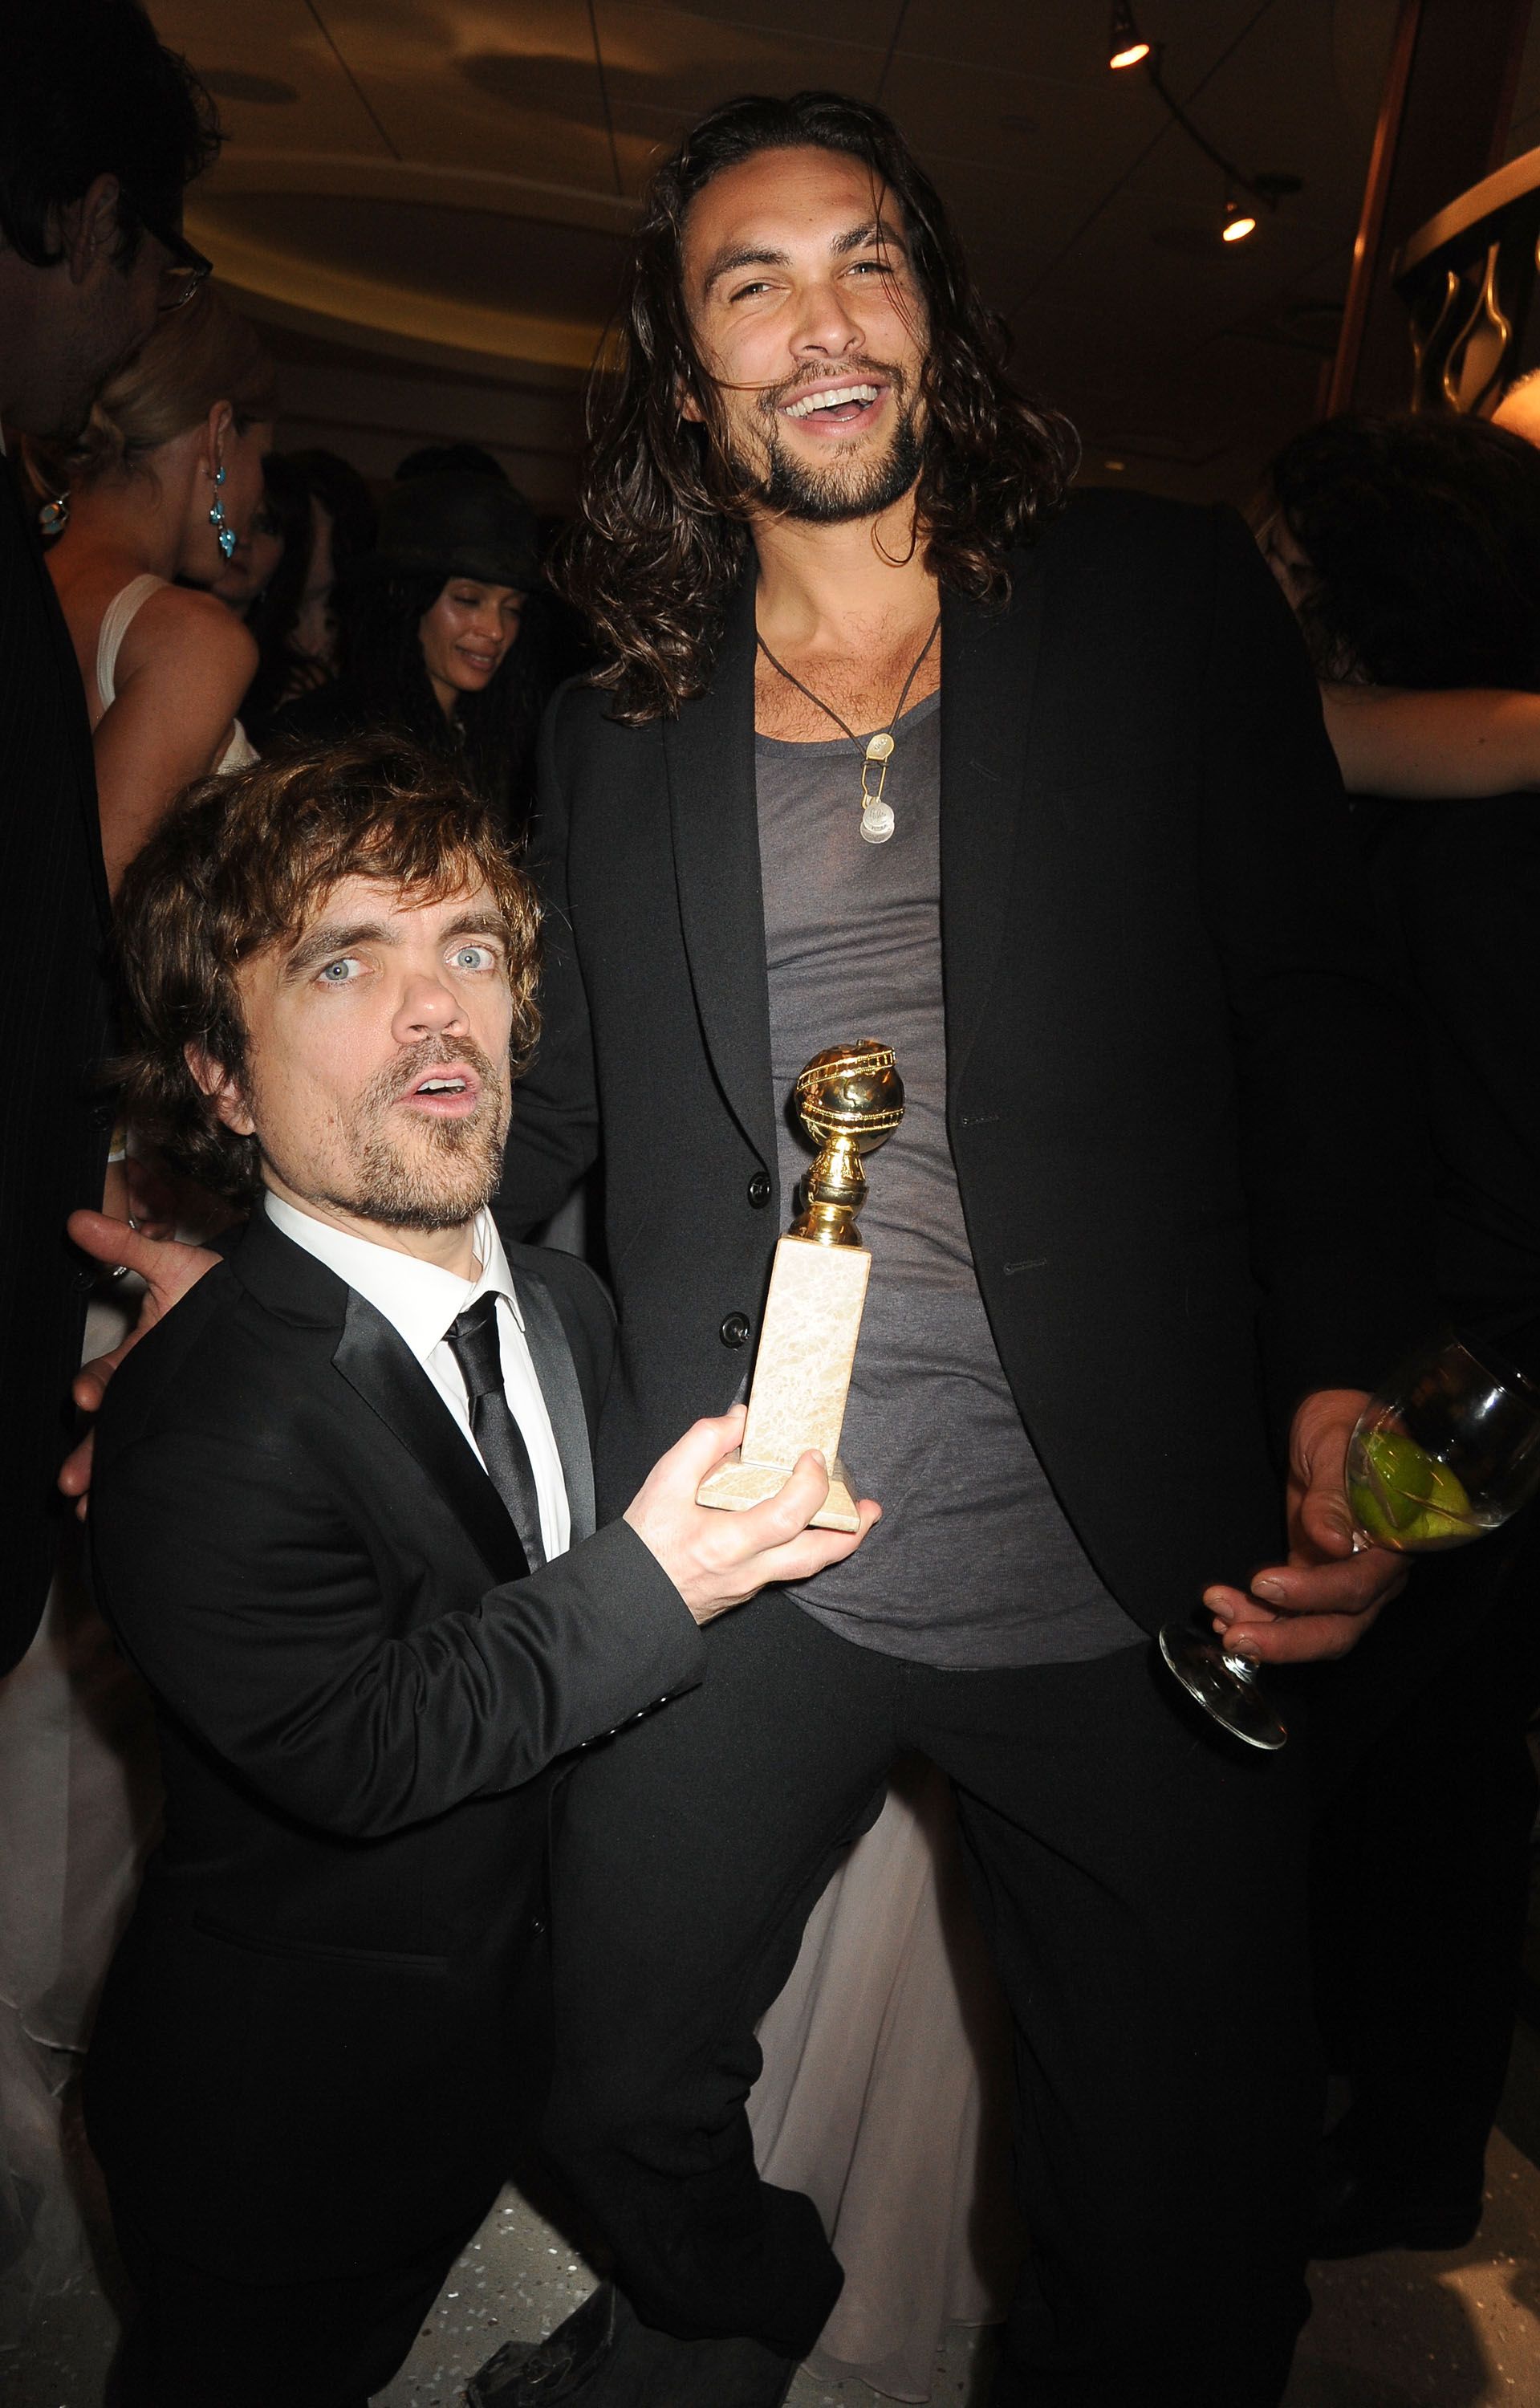  Peter Dinklage and Jason Momoa at the HBO's Official After Party for the 69th Annual Golden Globe Awards in 2012 in Beverly Hills, California | Source: Getty Images